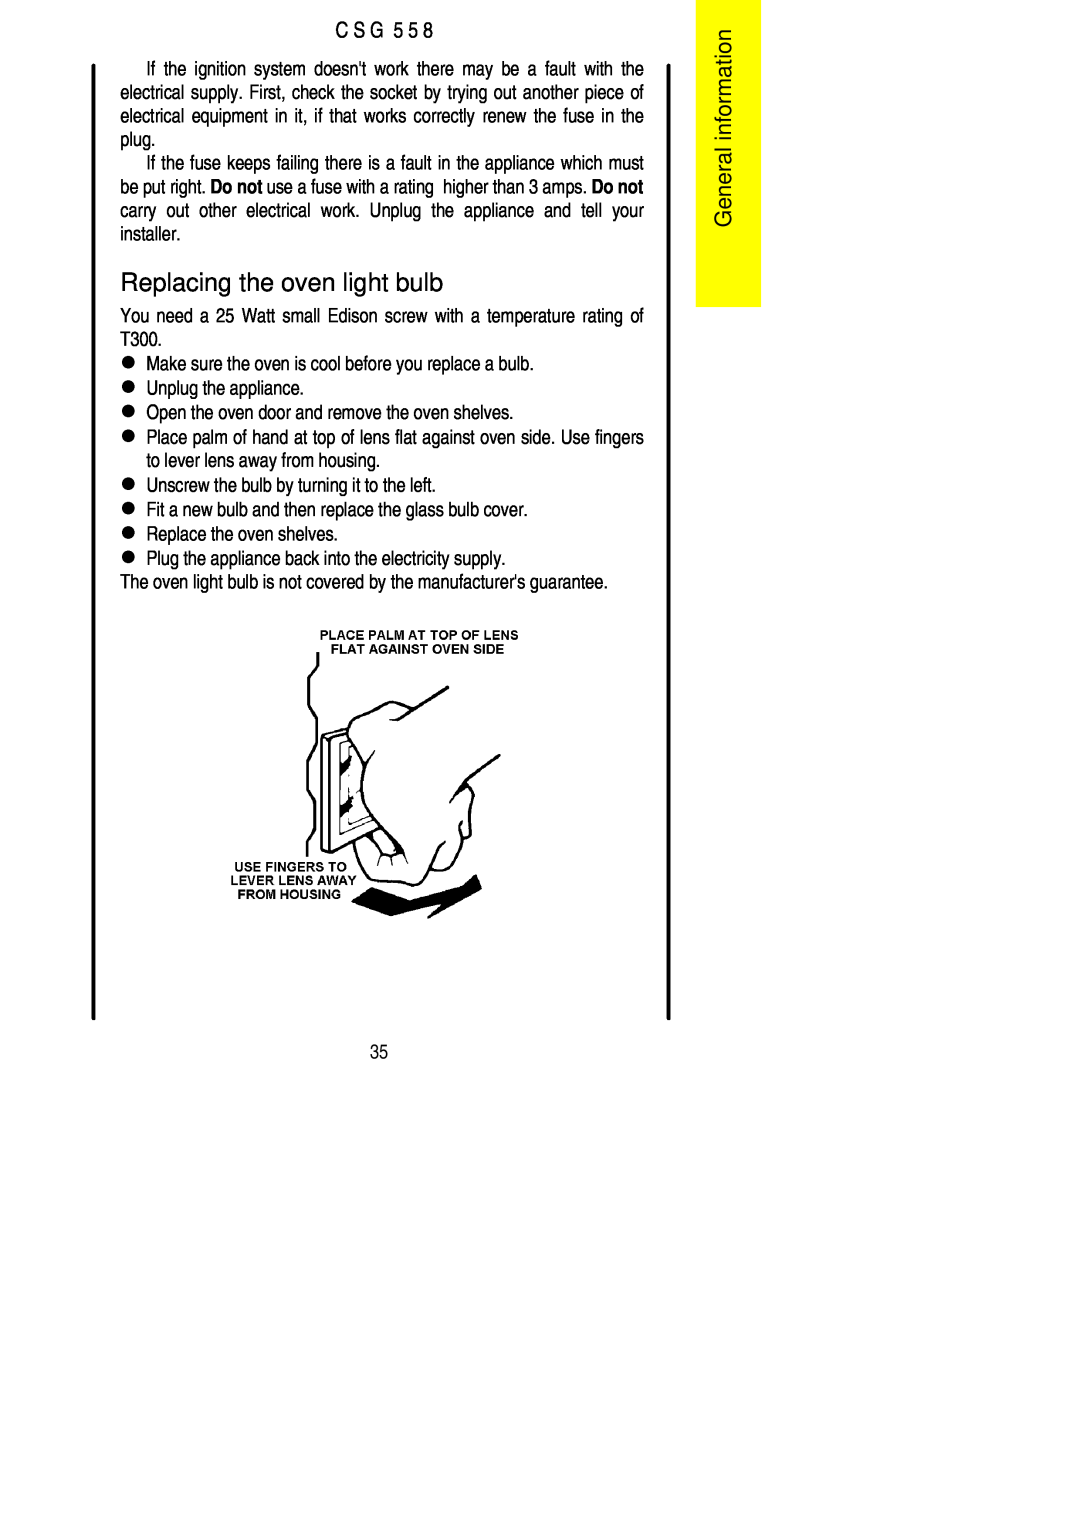 Electrolux CSG 558 installation instructions Replacing the oven light bulb, General information, C S G 5 5 